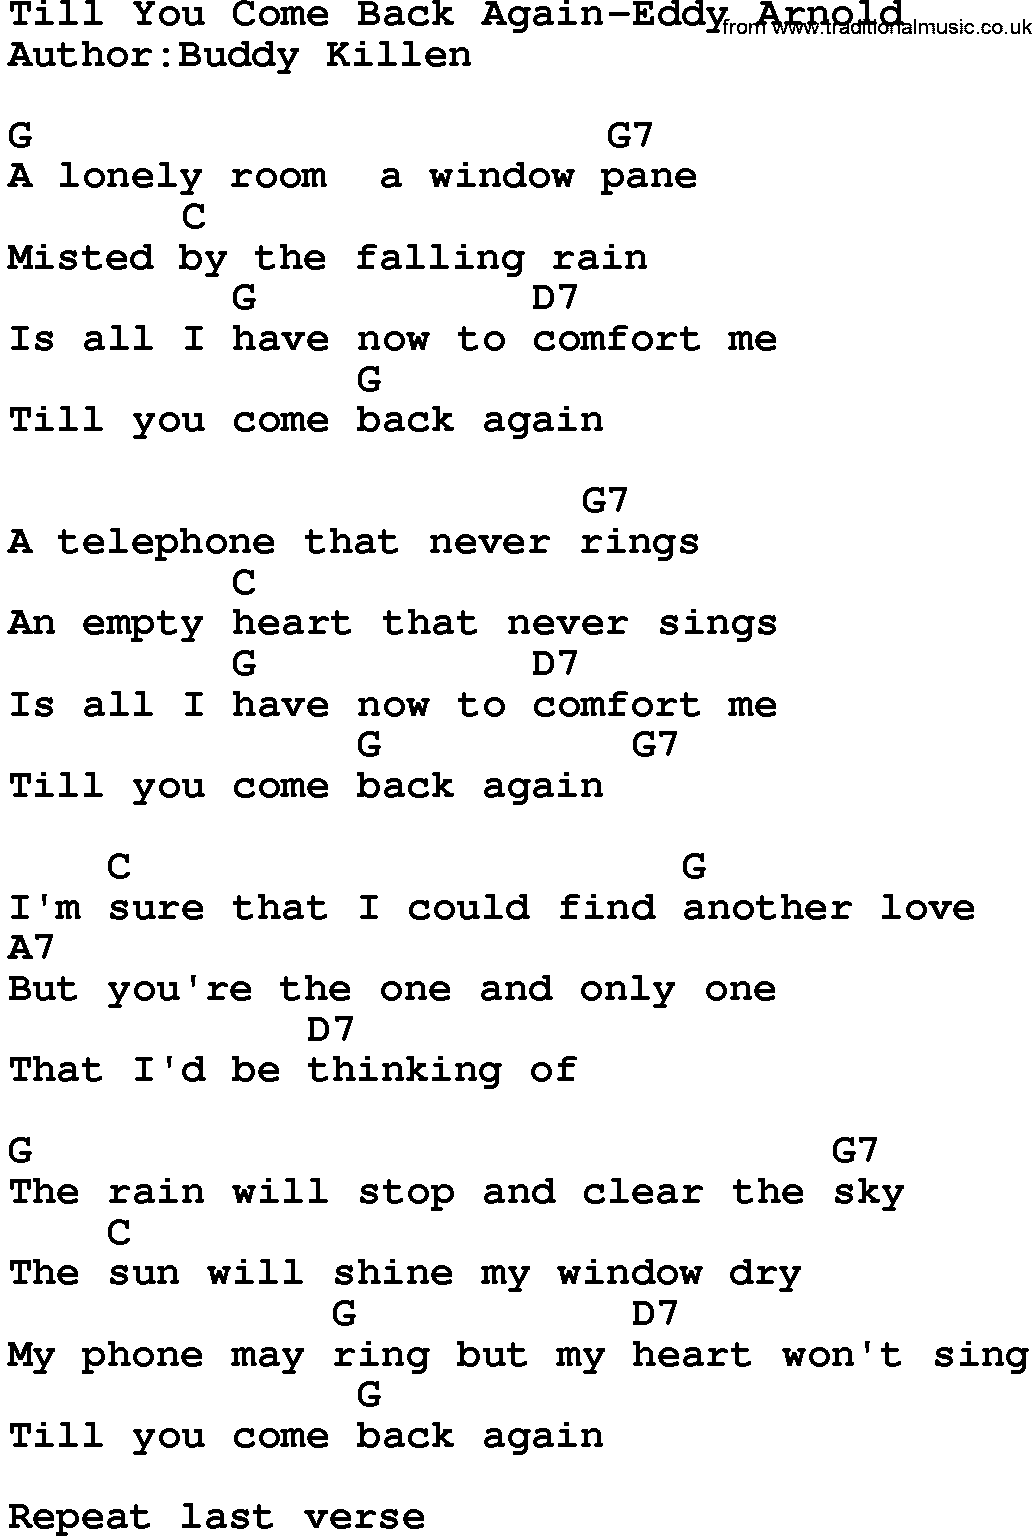 Country music song: Till You Come Back Again-Eddy Arnold lyrics and chords